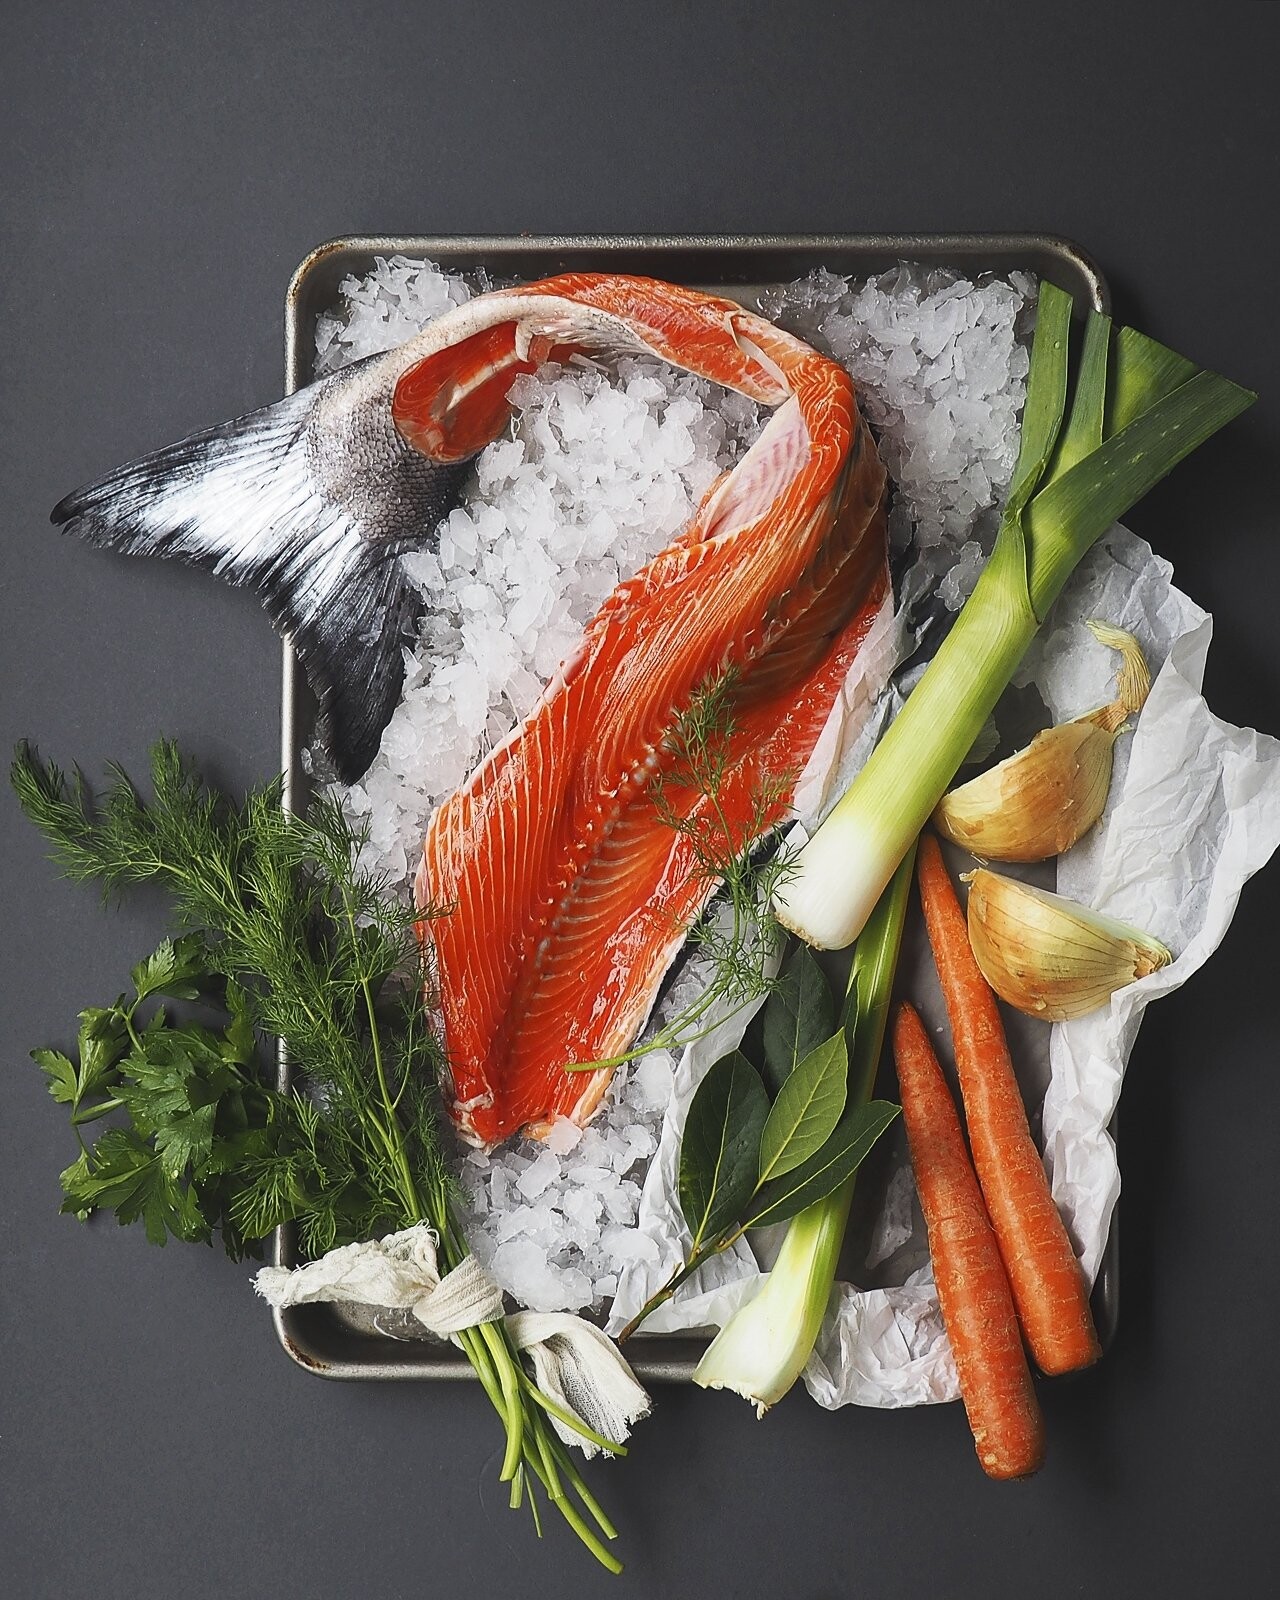 This fresh wild Alaskan salmon carcass came from a local fishmonger who generously gave it away to me for almost nothing.  I styled and shot this photo to tell the story of making a fish stock with this eye catching organic beauty from nature.<br />
                        